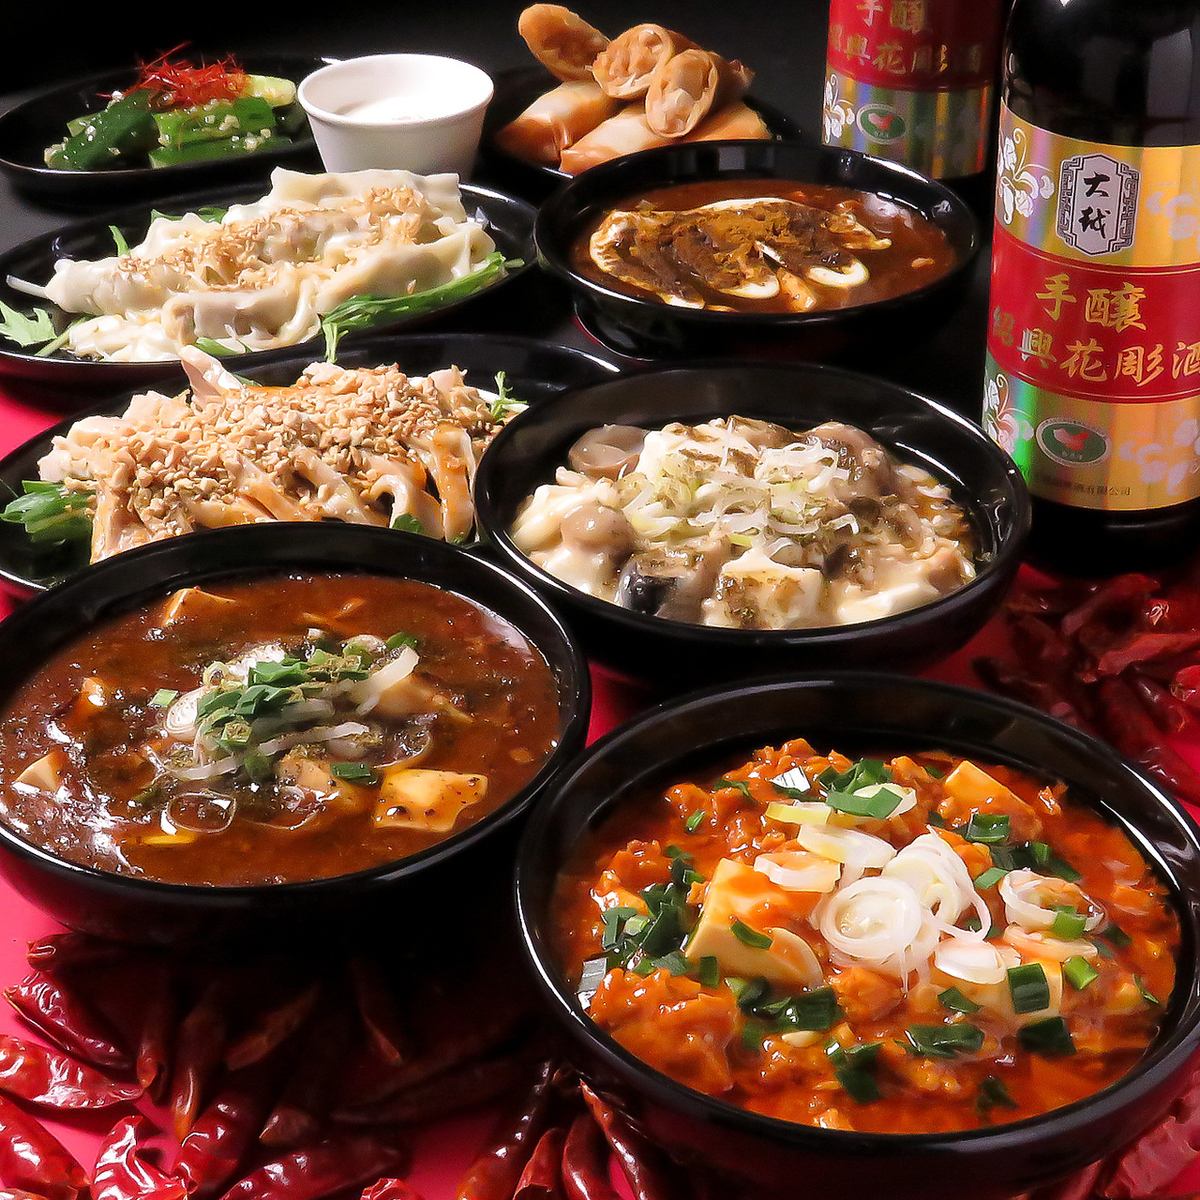 The popular mapo tofu specialty store has finally landed! #I only believe in mapo tofu